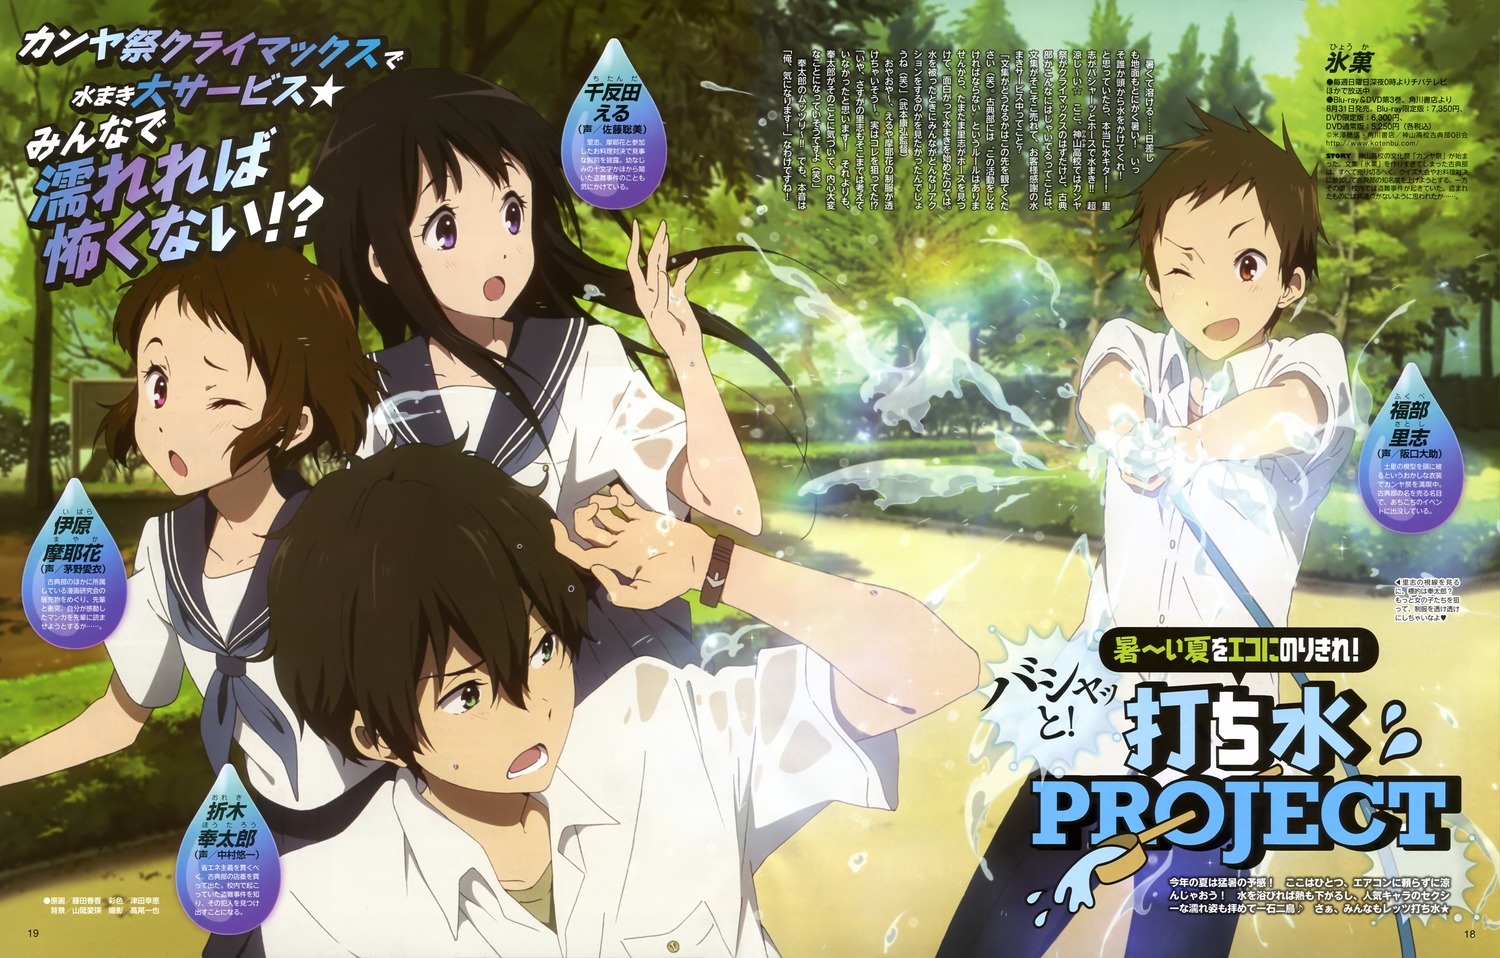 Top 10 Kyoto Animation Series According Japanese Anime Fans - Haruhichan